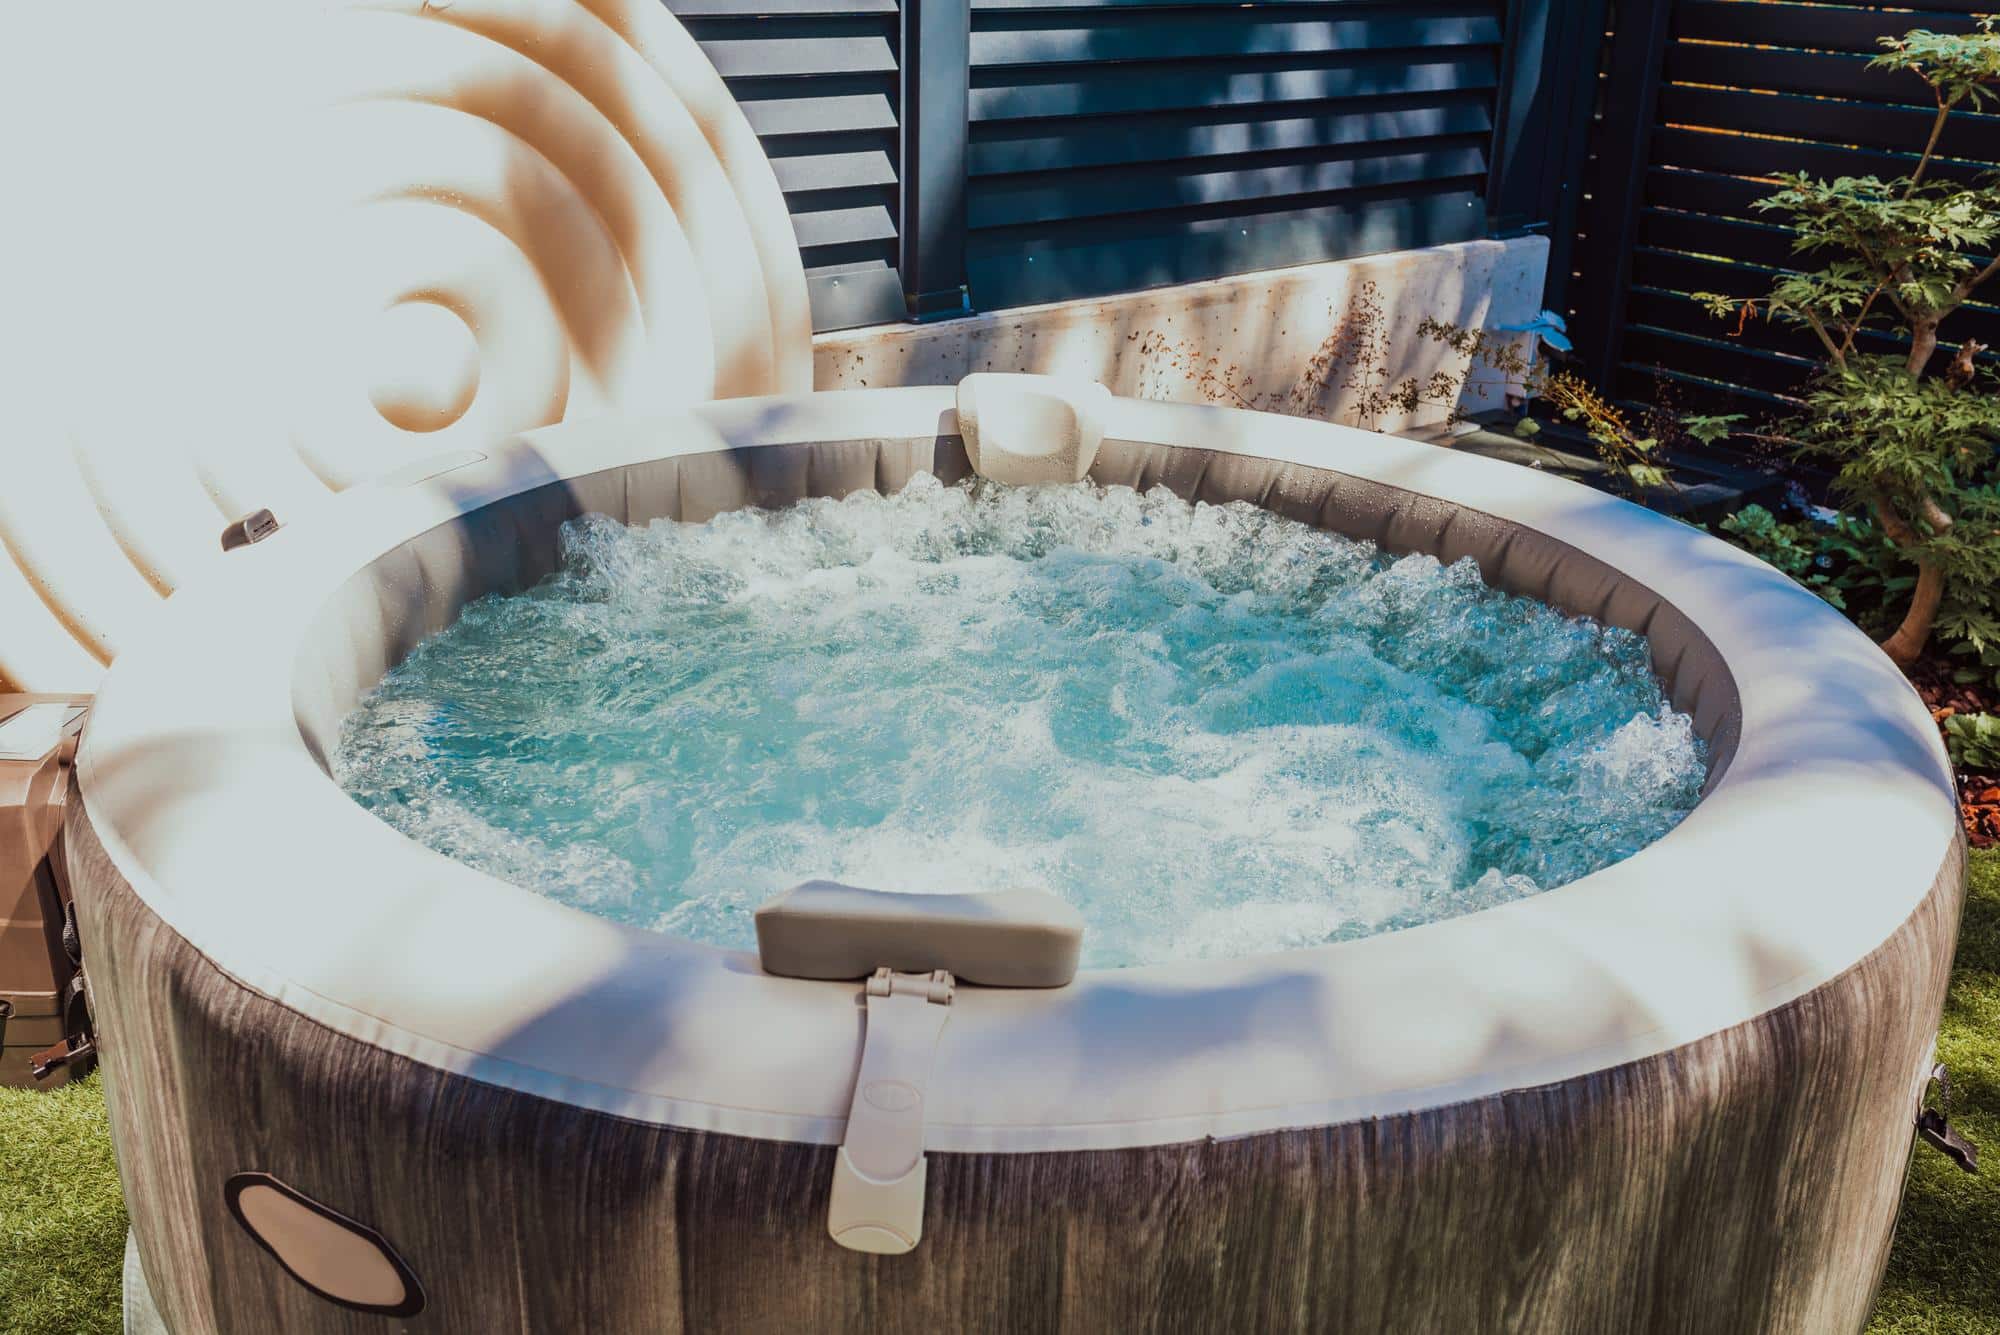 hot tub installation and wiring service in Langley or Surrey